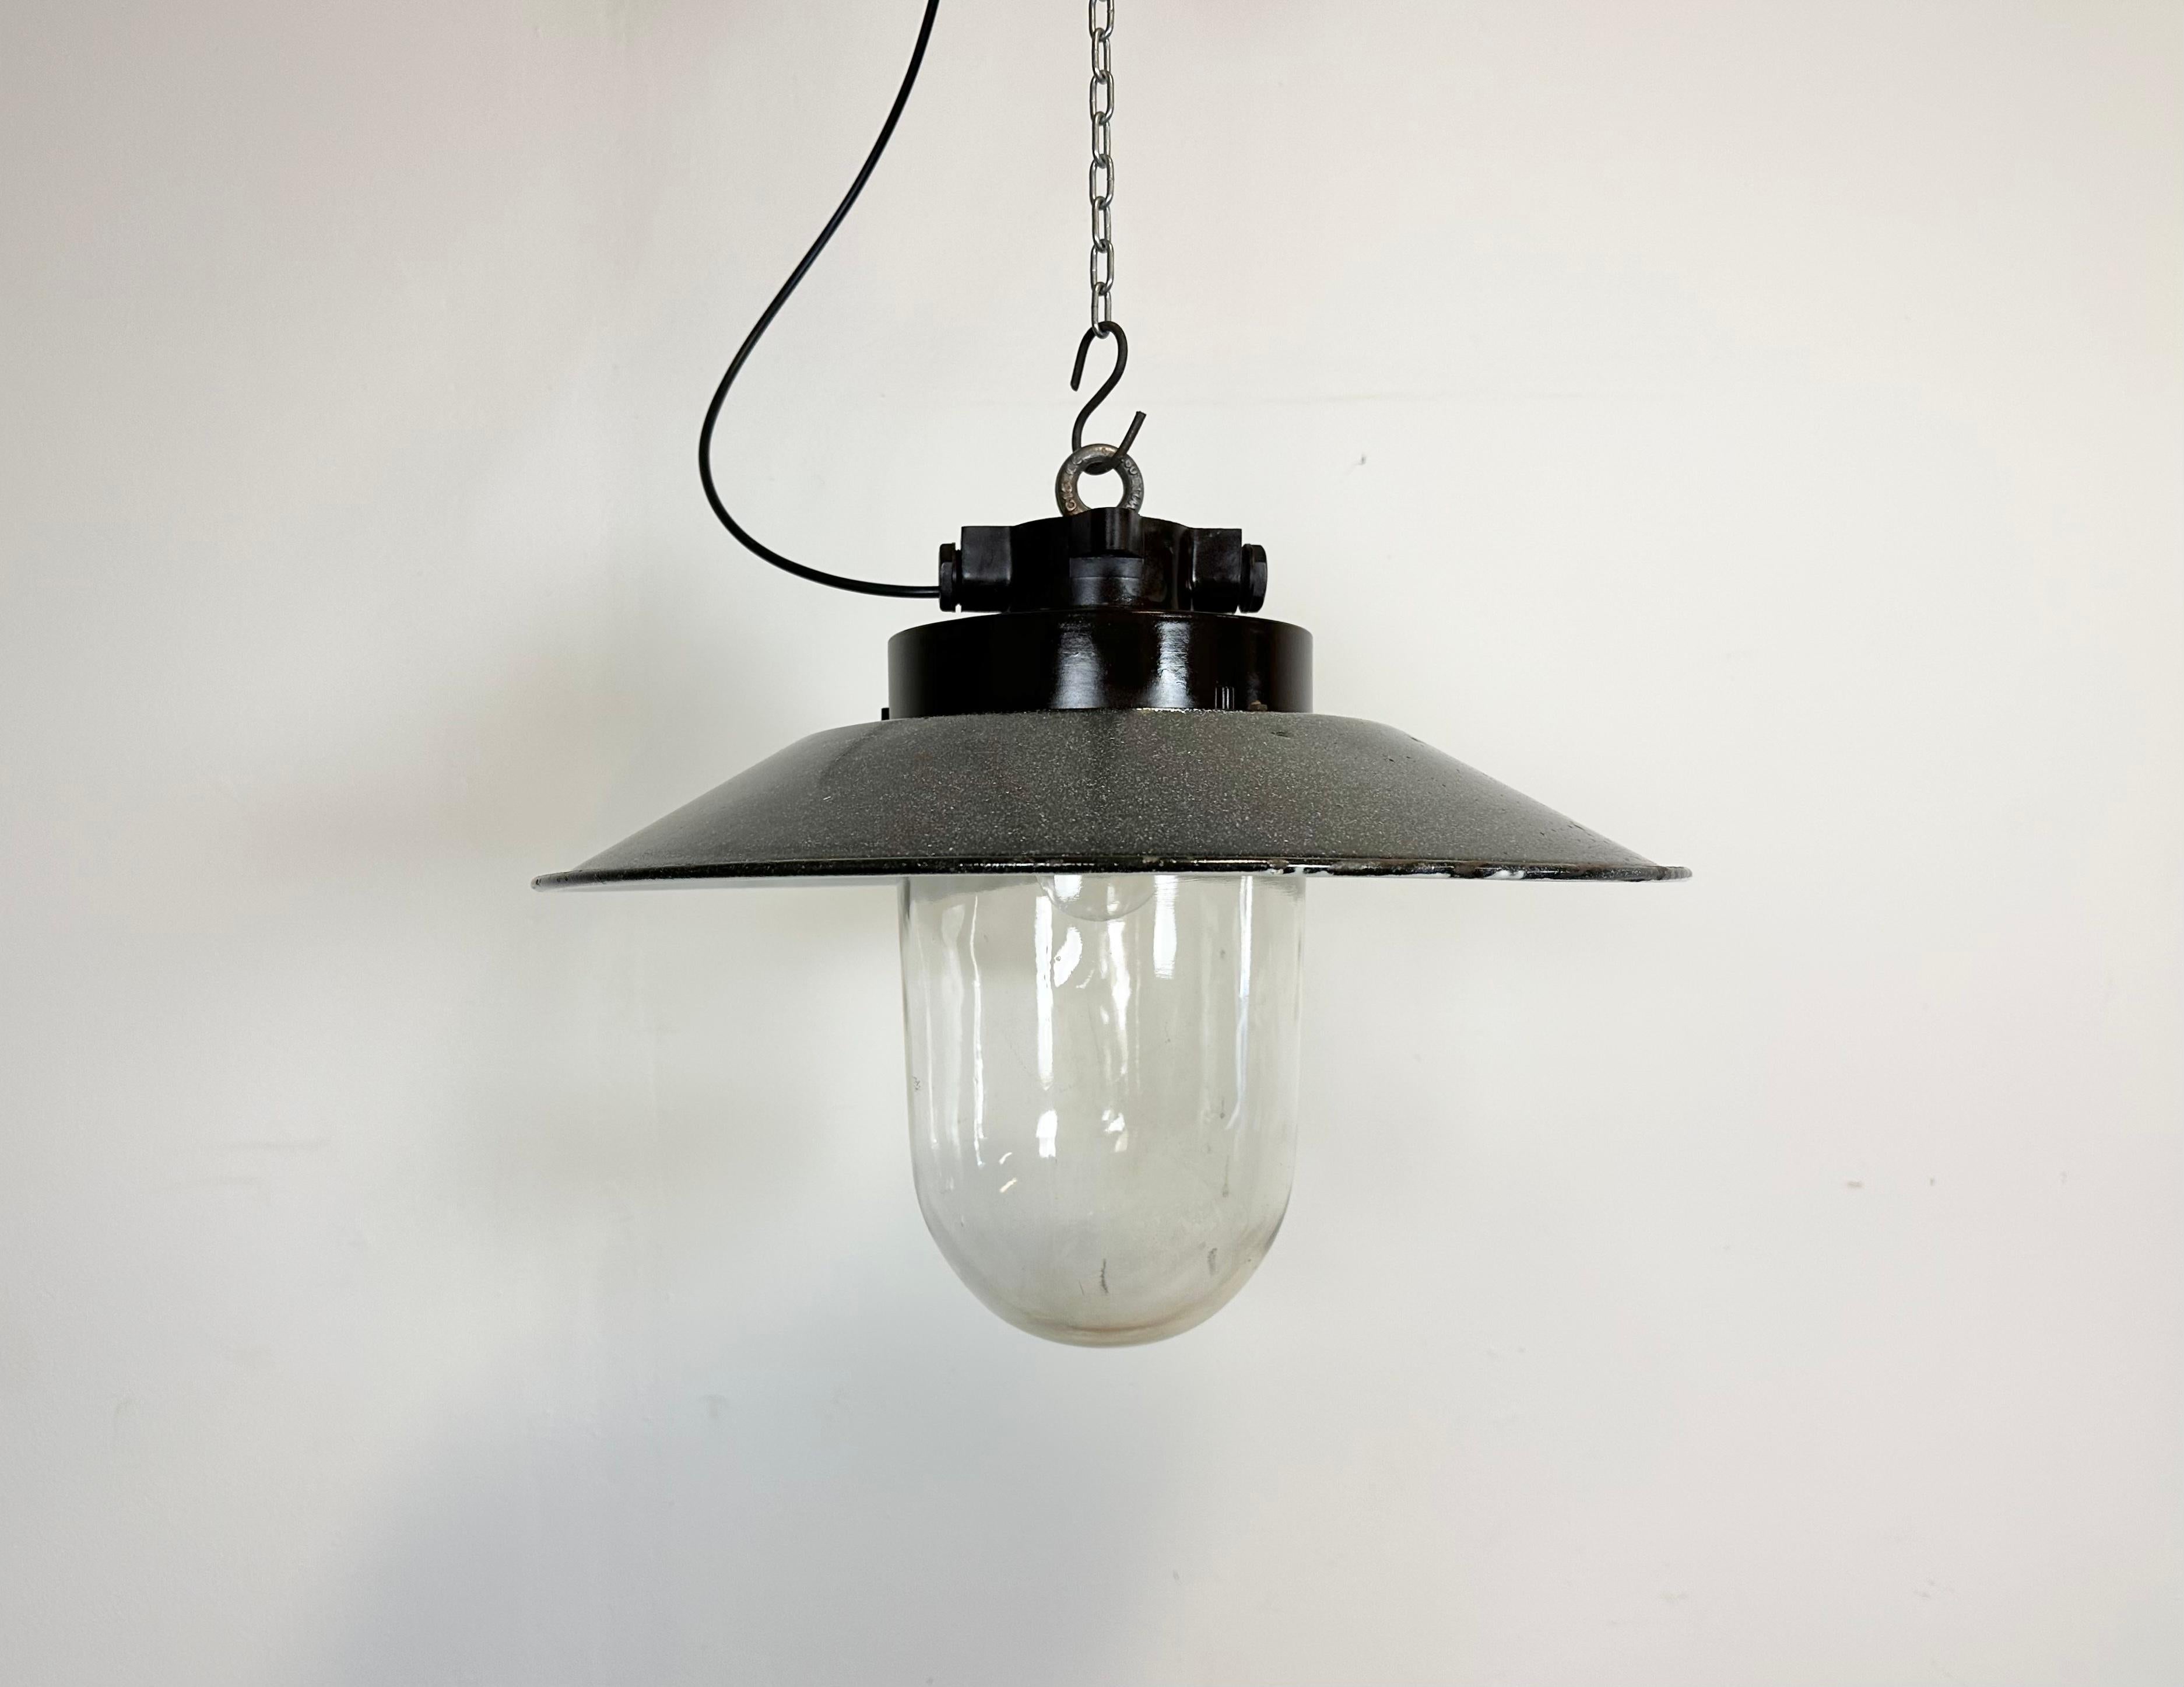 - Vintage industrial light from former Czechoslovakia made during the 1960s
- Grey enamel shade with white interior
- Bakelite top
- Clear glass
- Porcelain socket requires E 27/ E26 lightbulbs
- New wire
- Weight: 3 kg
- The diameter of the shade